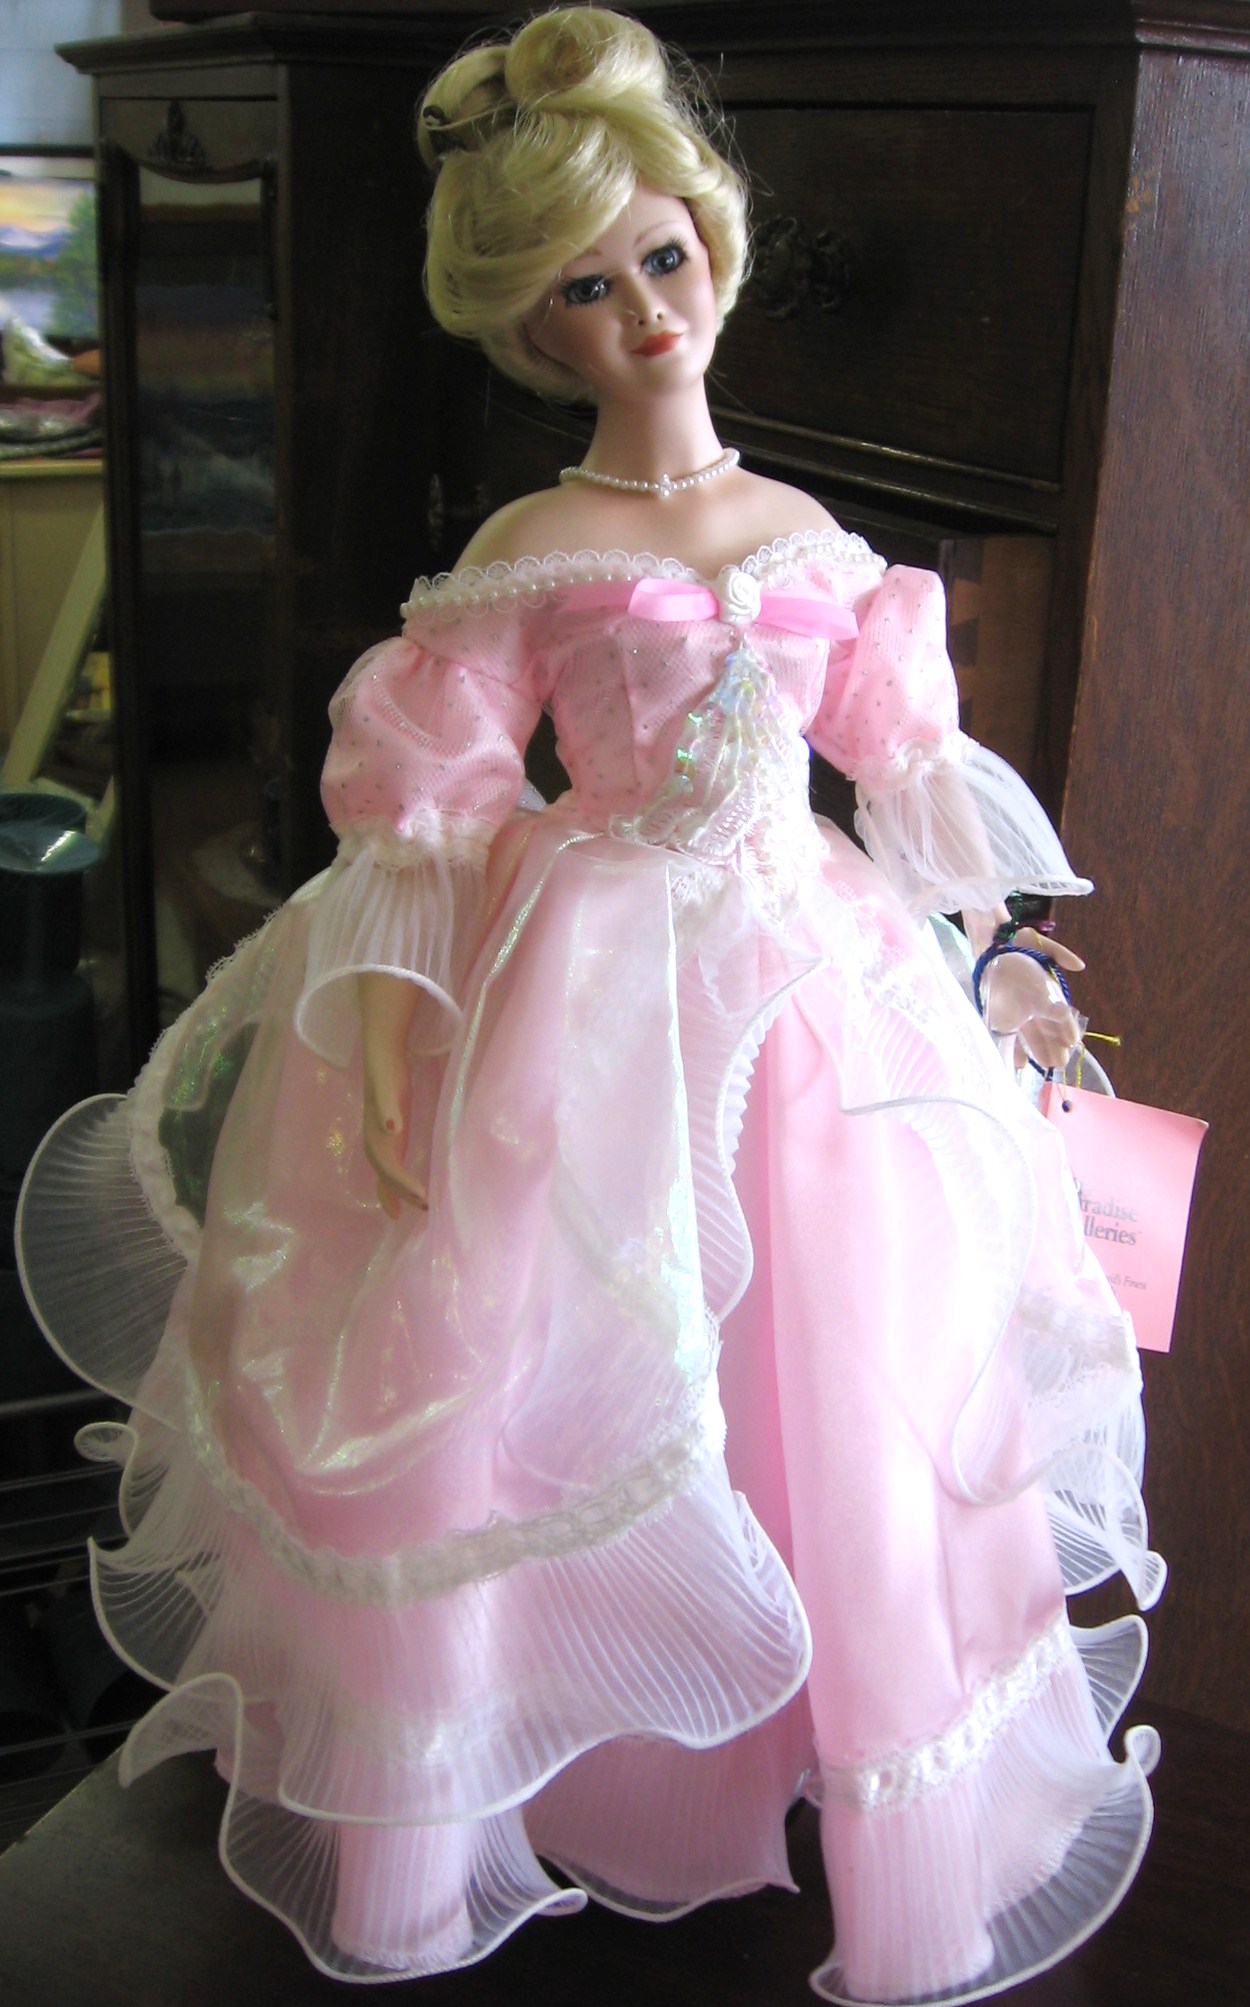 the doll is wearing a dress that matches her shoes